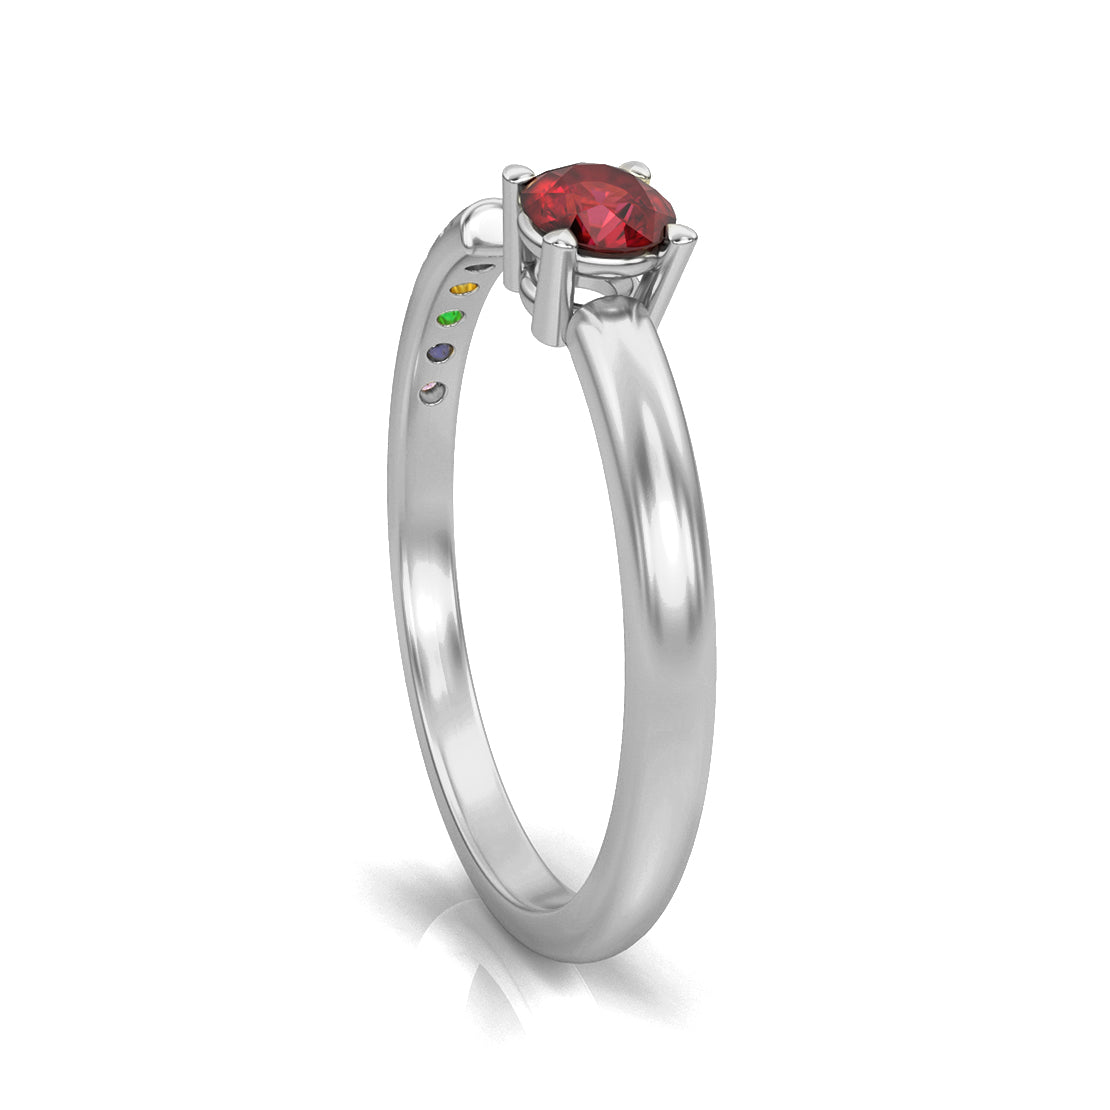 Rainbow Open Ring in 14k White Gold